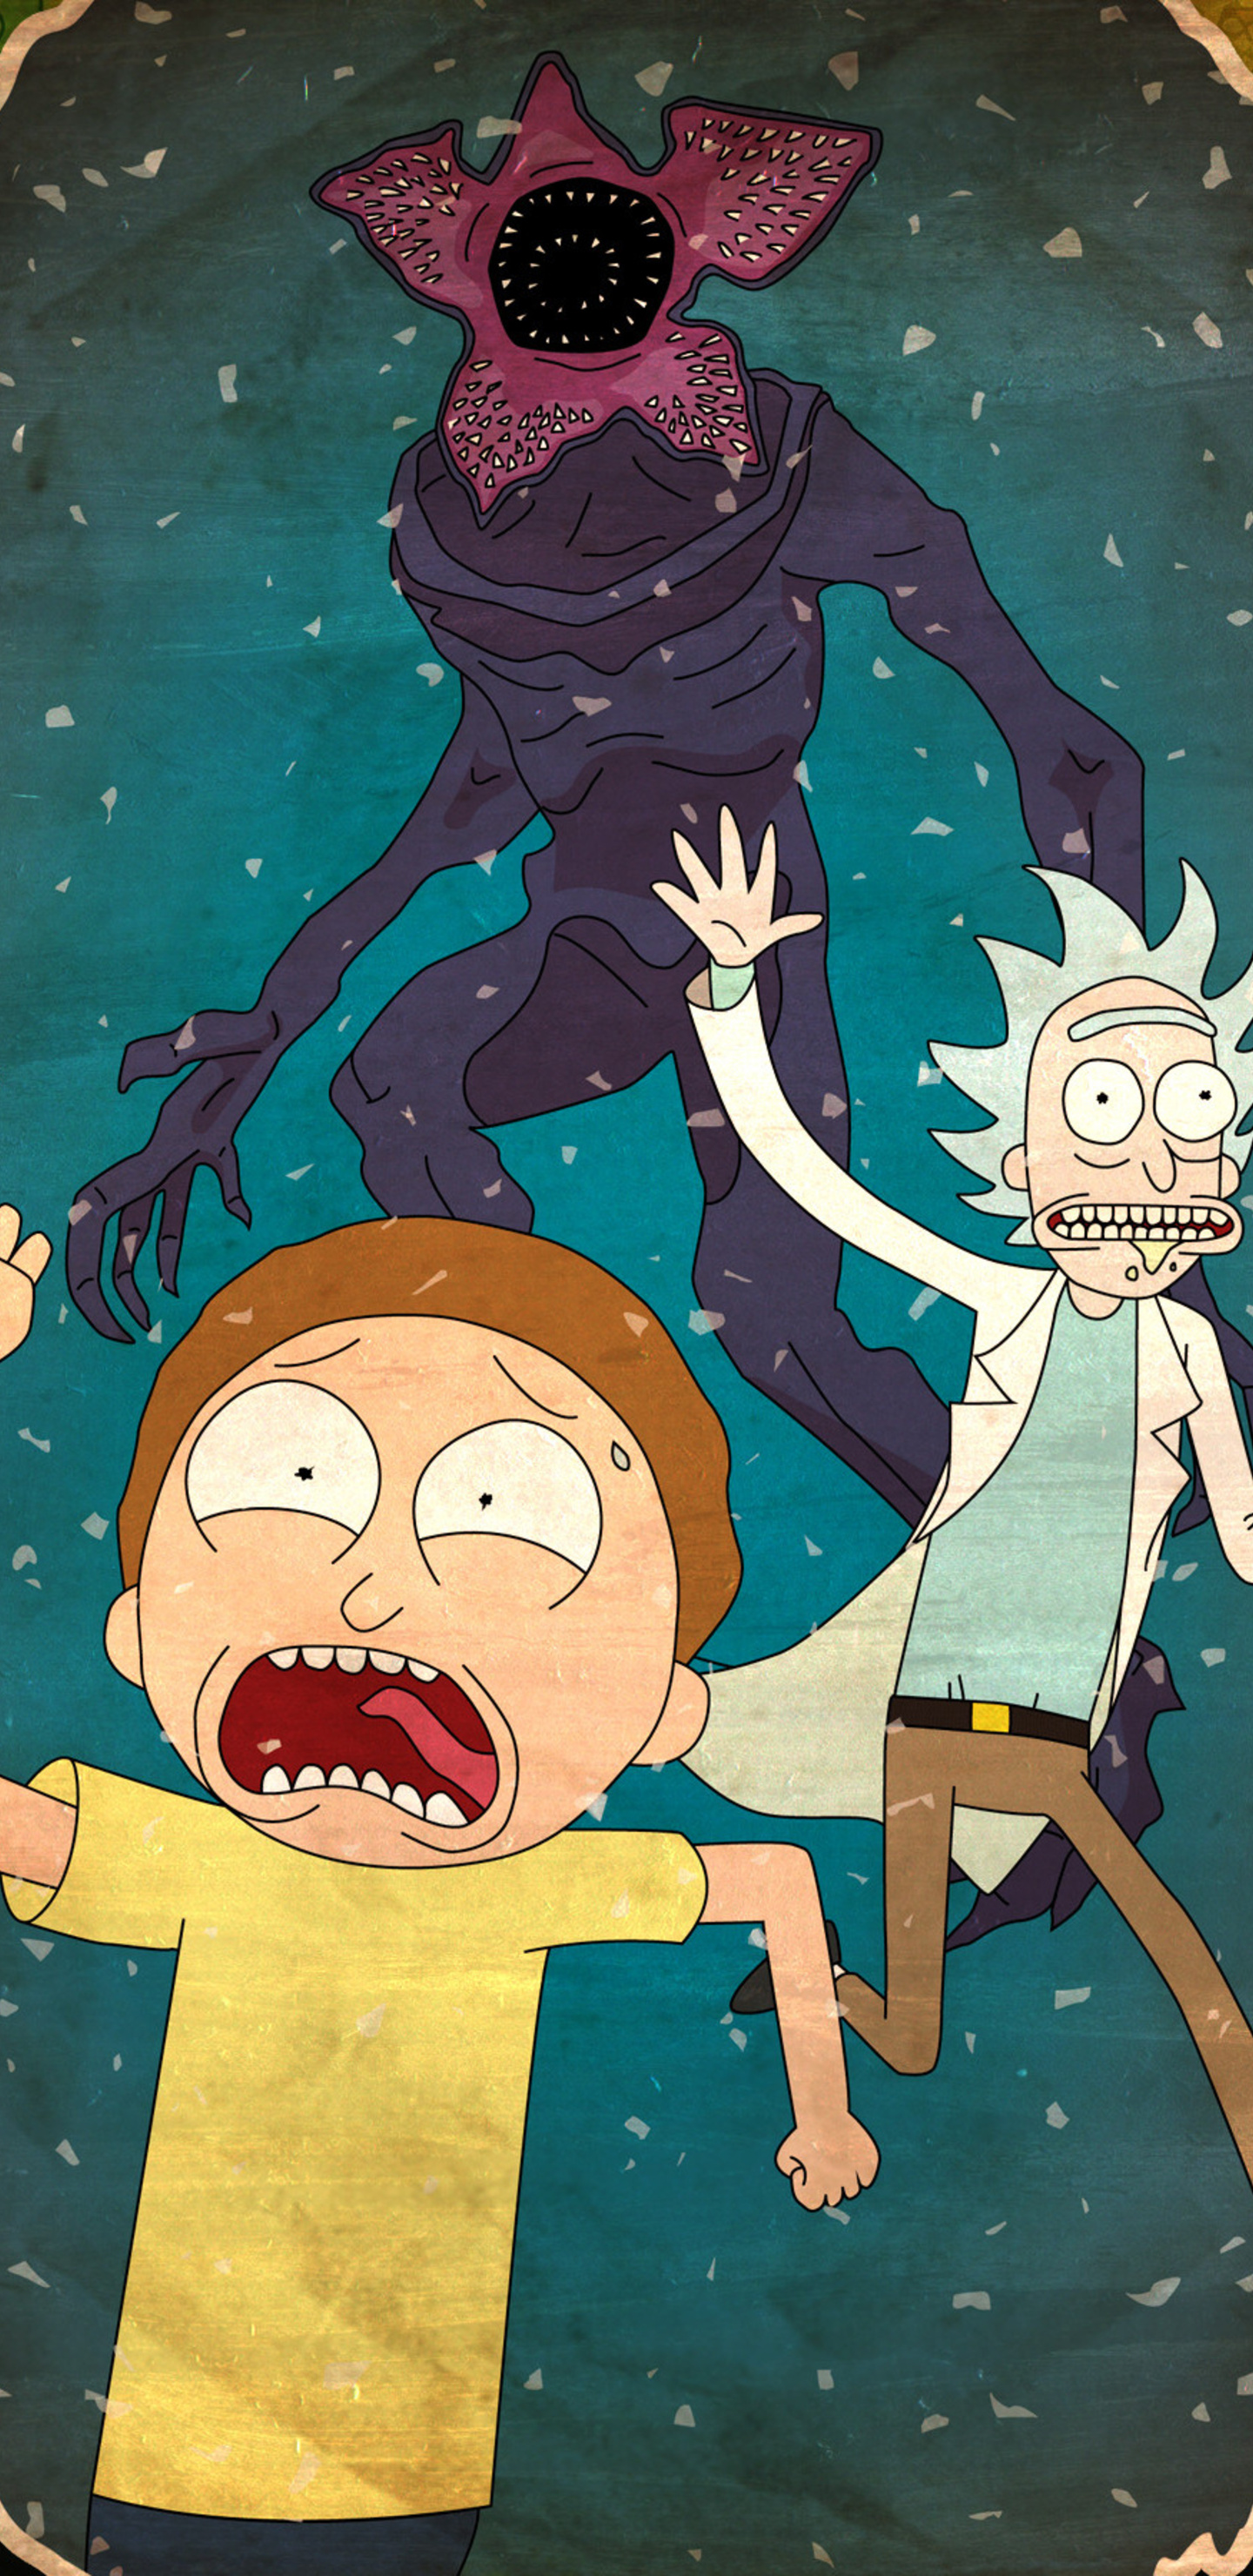 1440x2960 Rick And Morty 4k Samsung Galaxy Note 9,8, S9,S8 ...